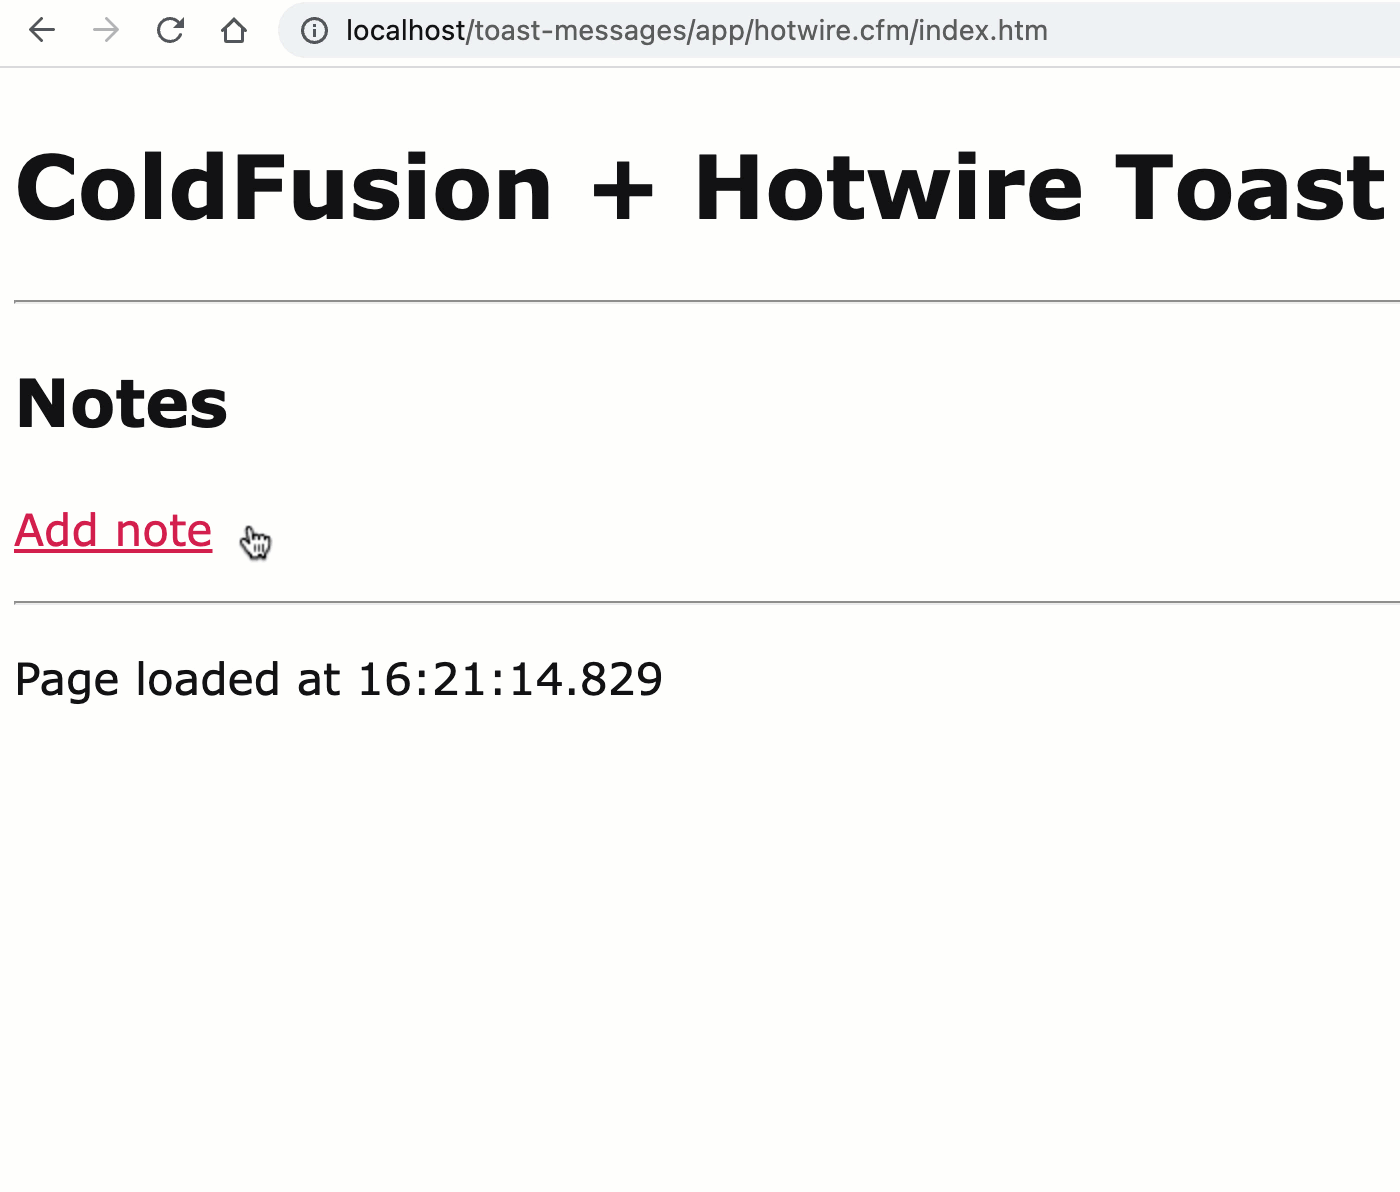 Toast messages slide in from left side of screen as user adds and removes notes from ColdFusion application.